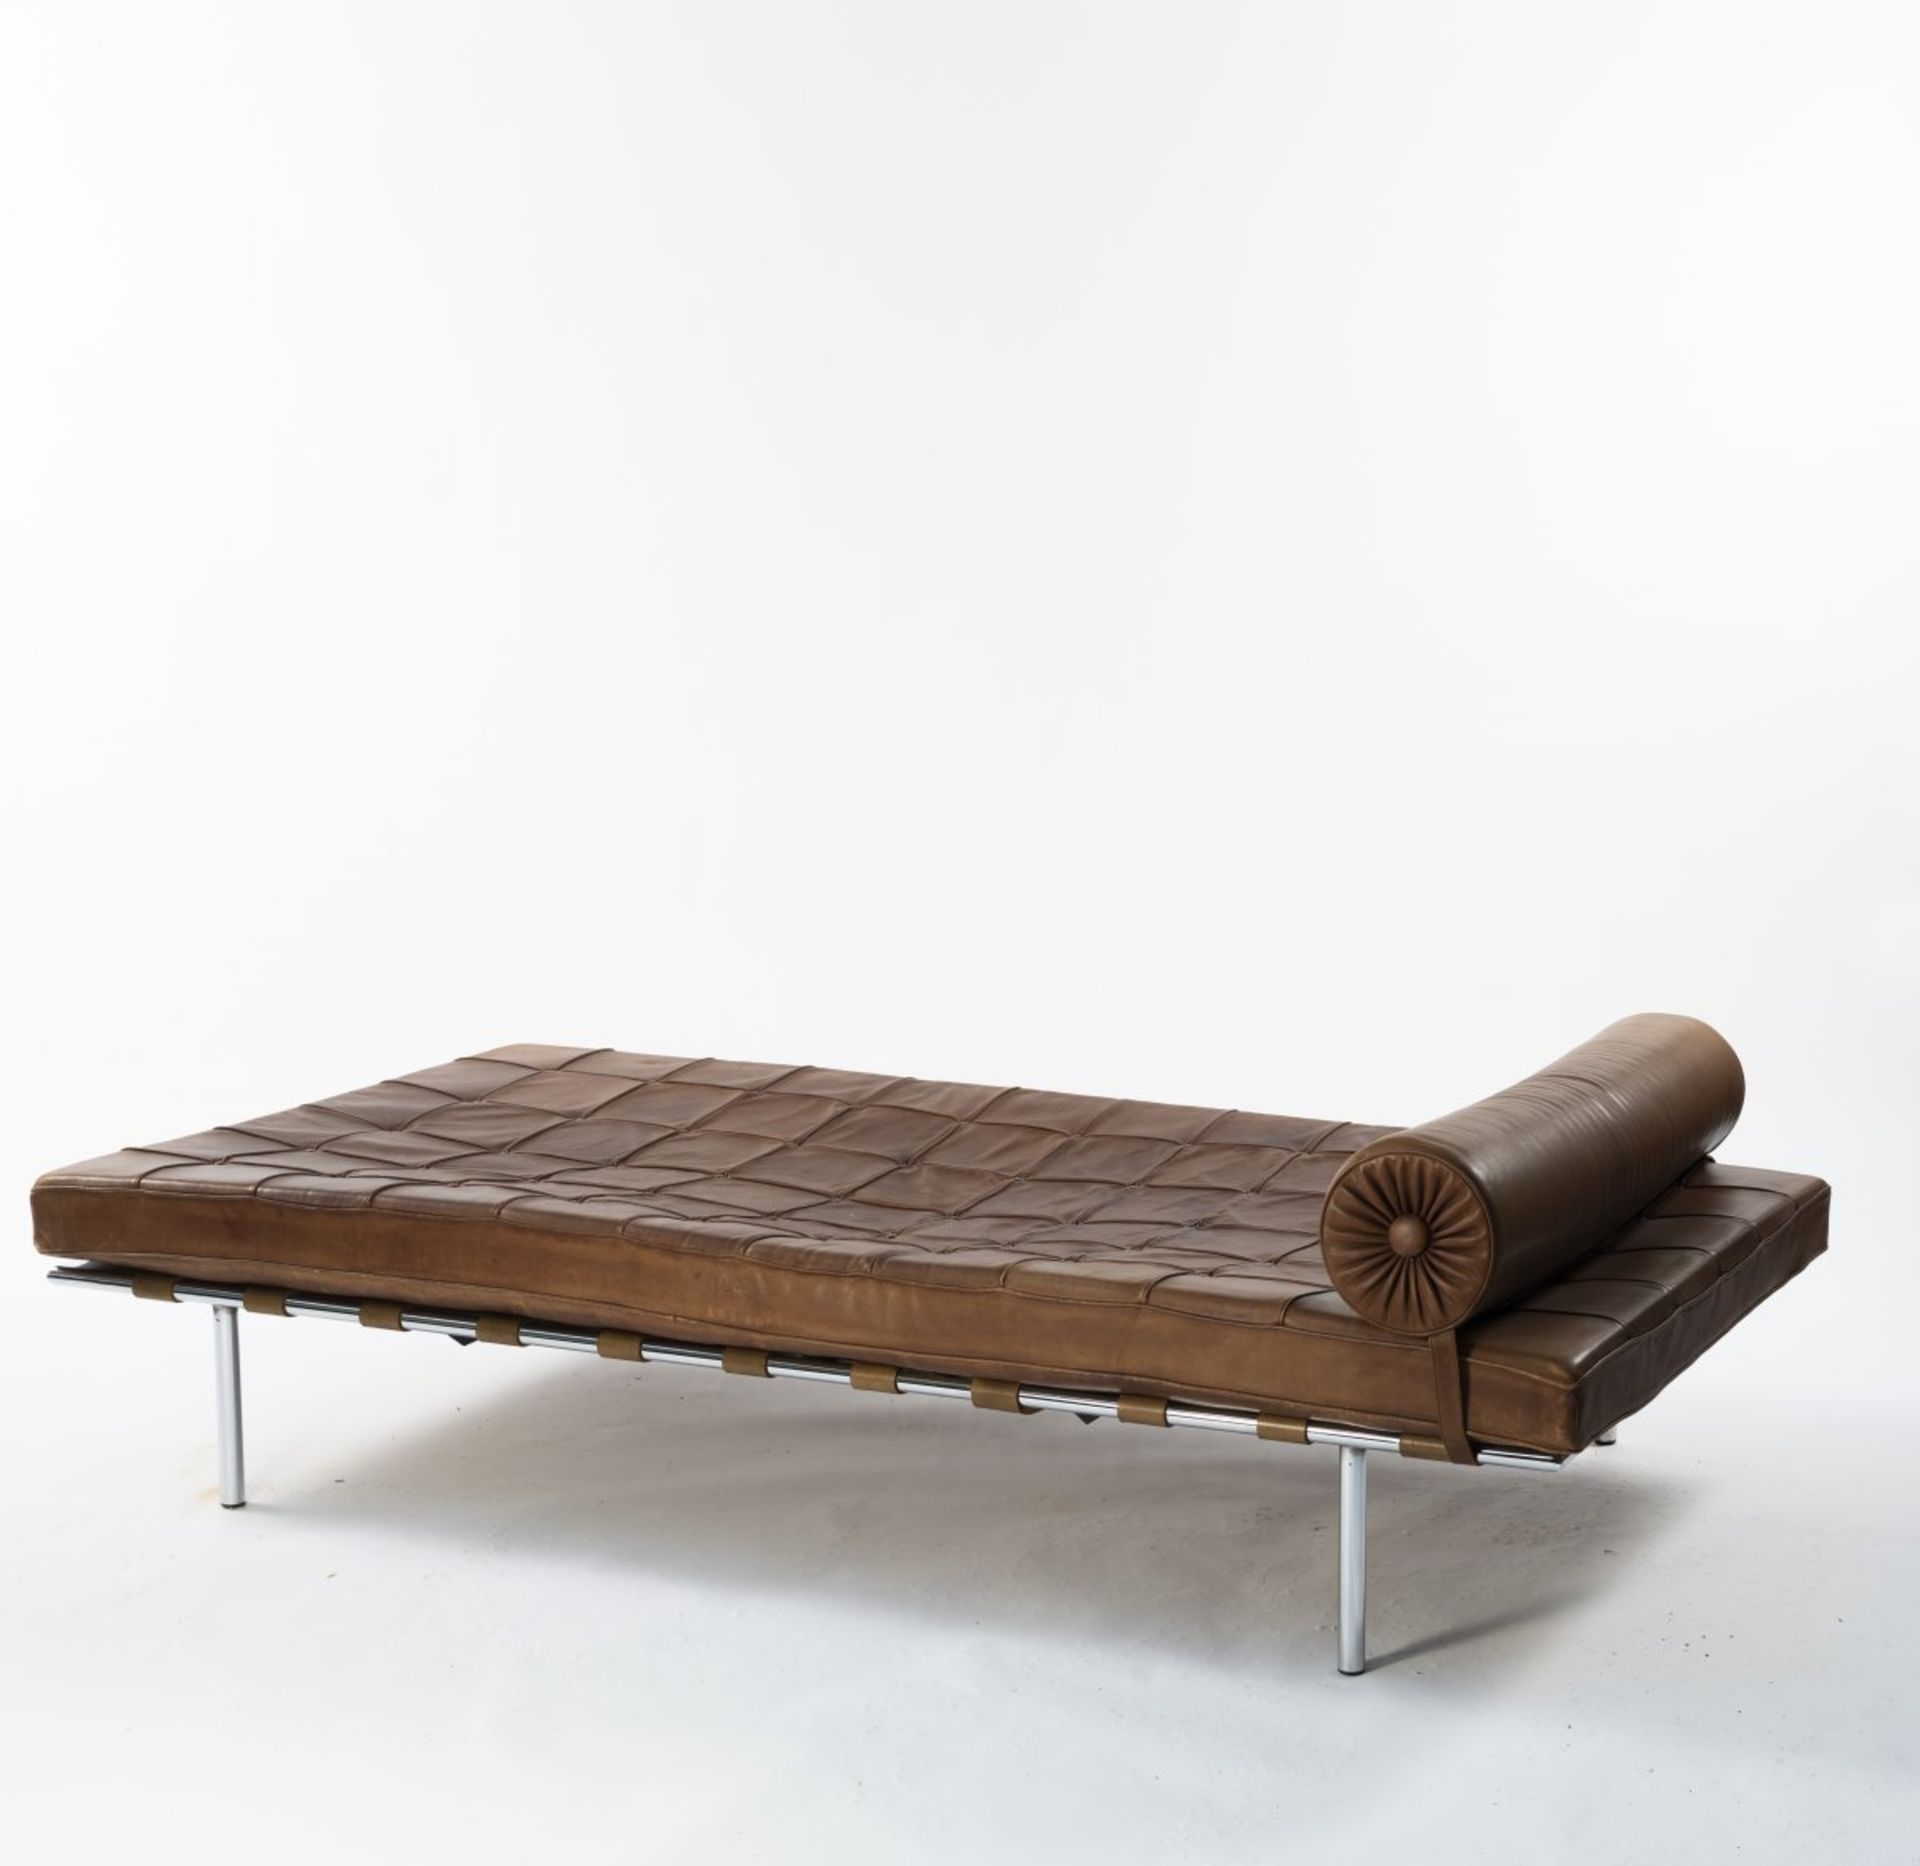 Ludwig Mies van der Rohe; Lilly Reich , 'Barcelona' daybed, 1930 - Image 3 of 6